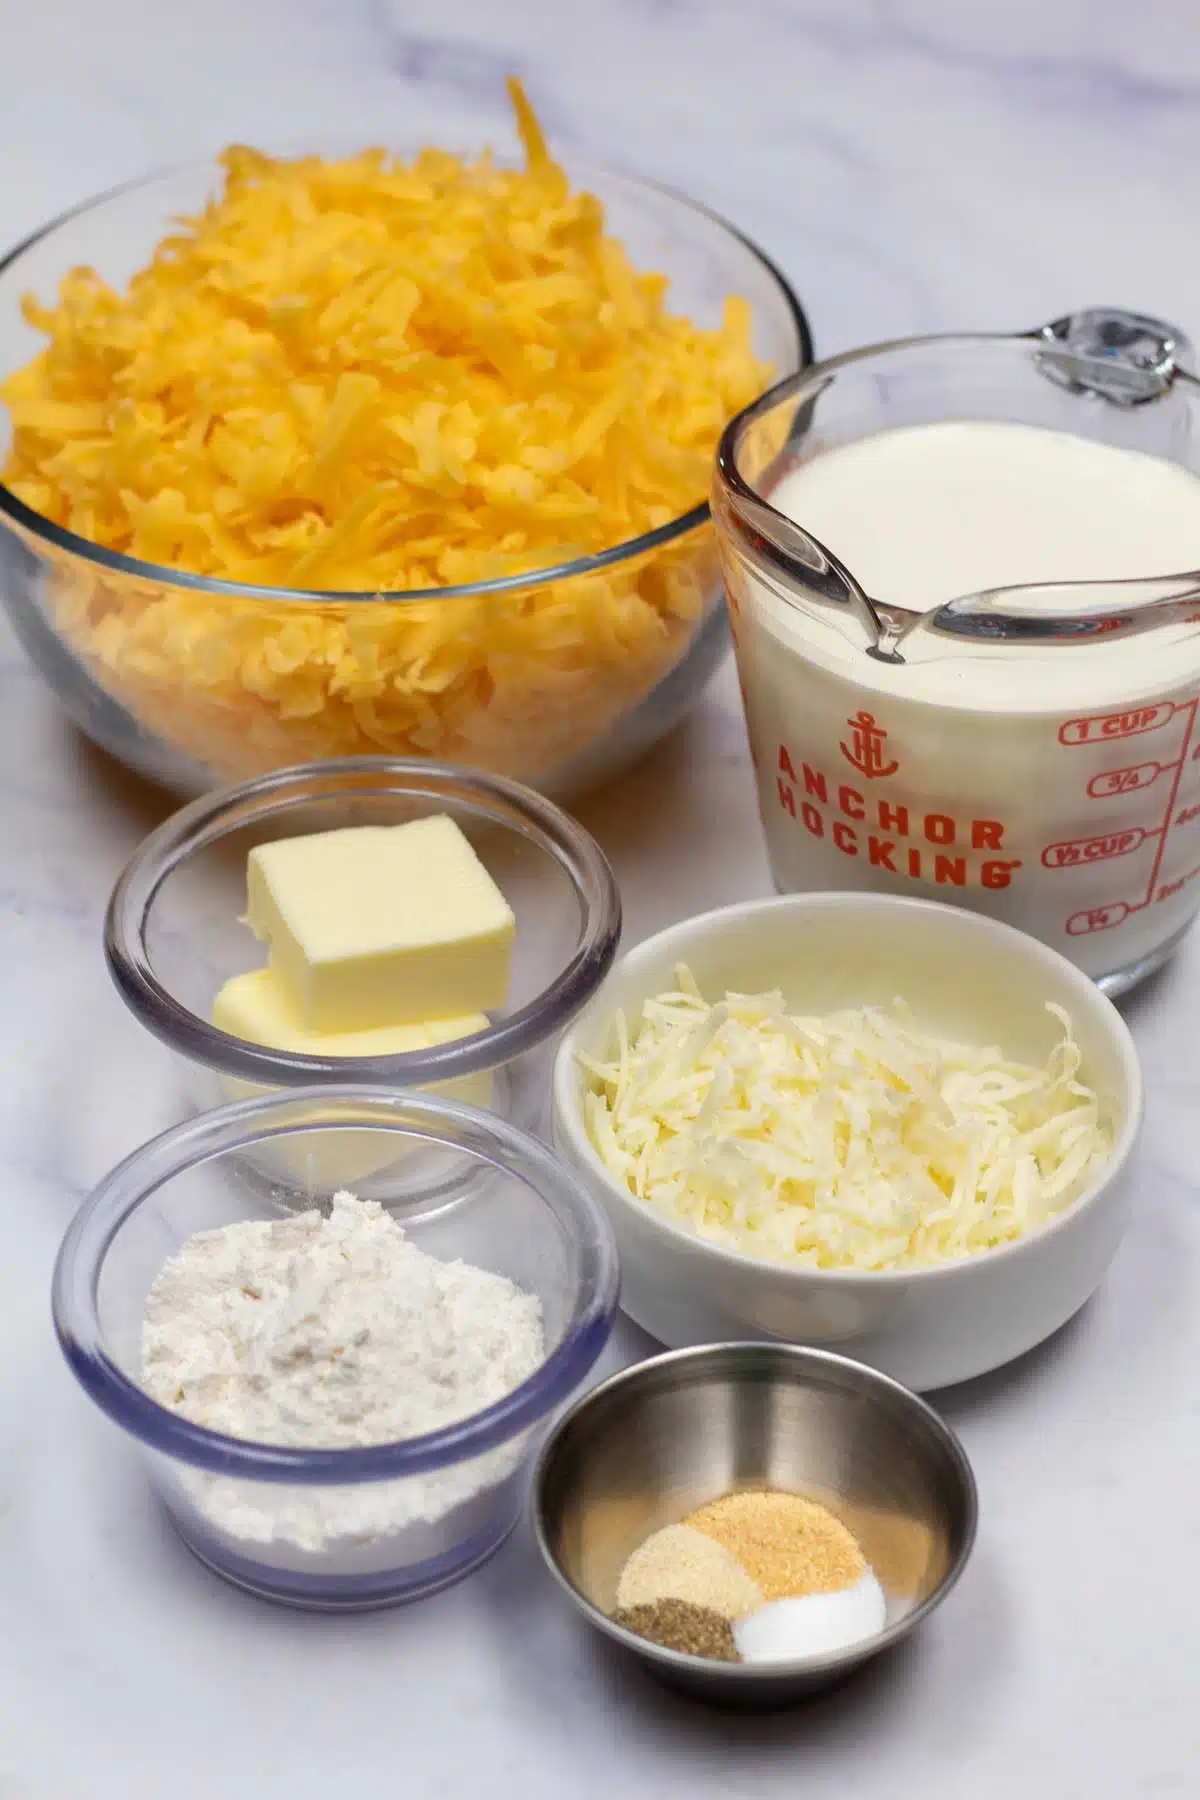 Tall image showing ingredients needed for cheese sauce.